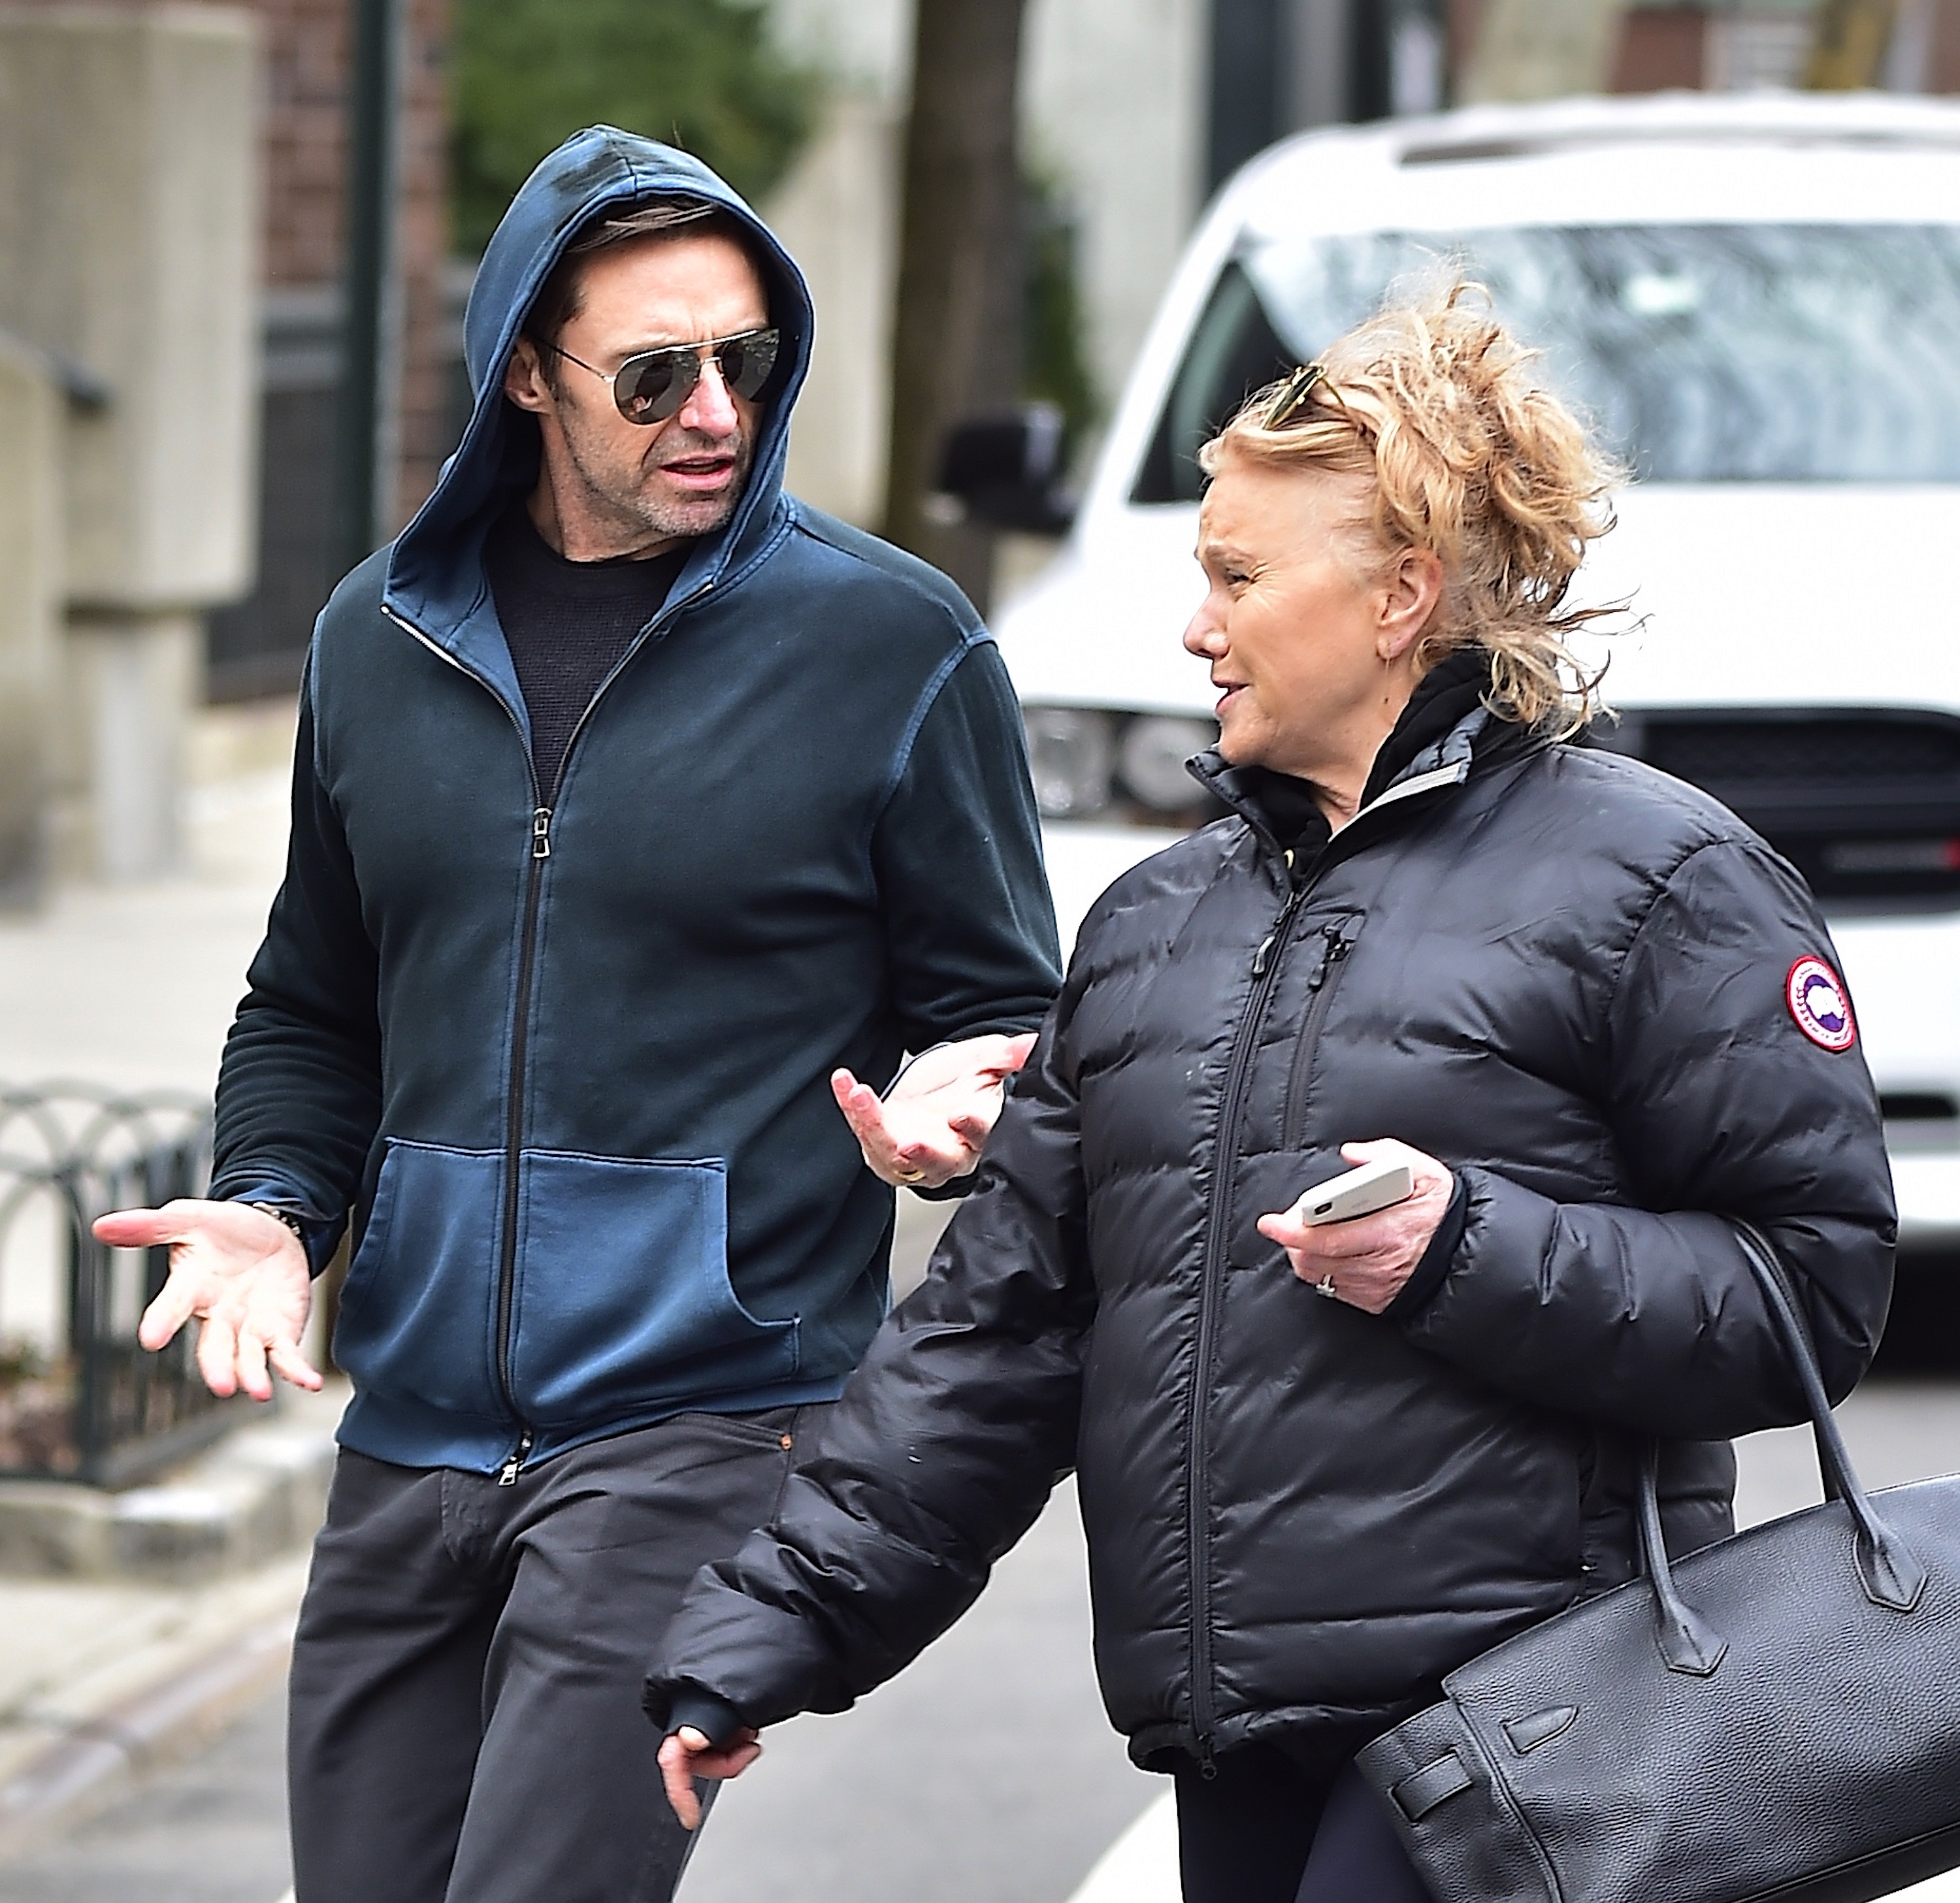 Hugh Jackman and Deborra-Lee Furness photographed by paparazzi in New York City, 2018 | Source: Getty Images